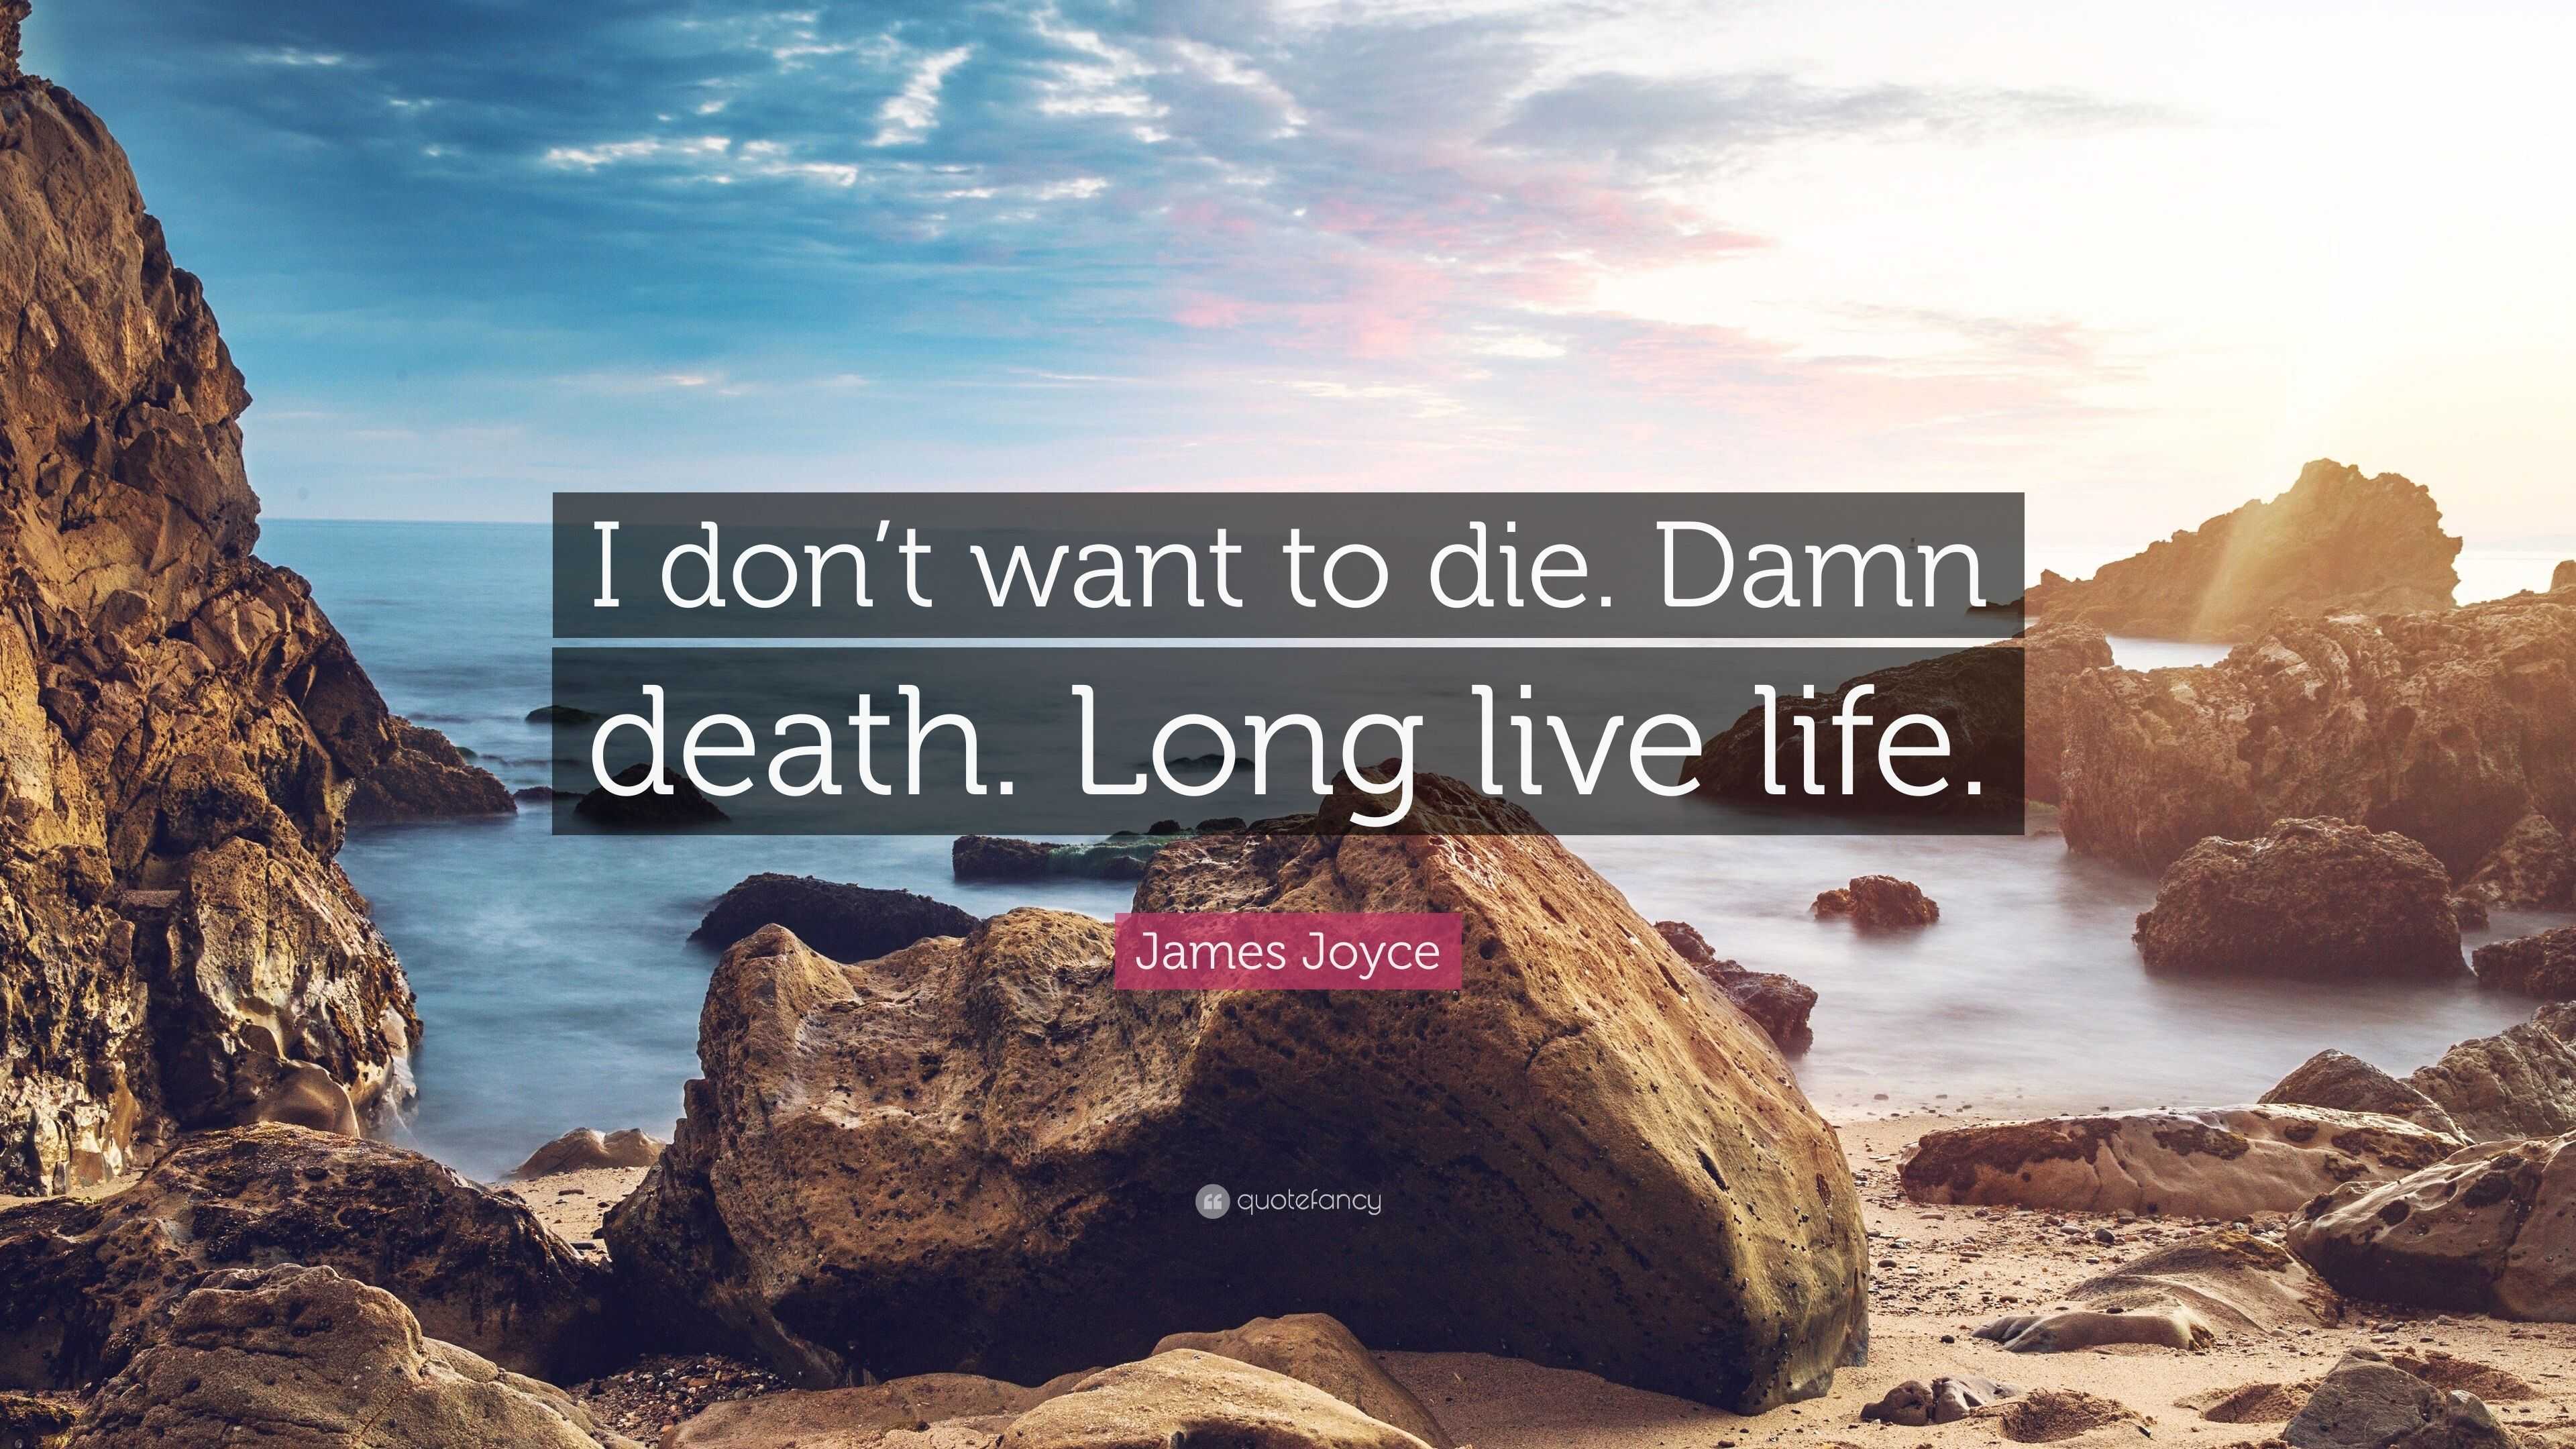 Life After Death By James Joyce